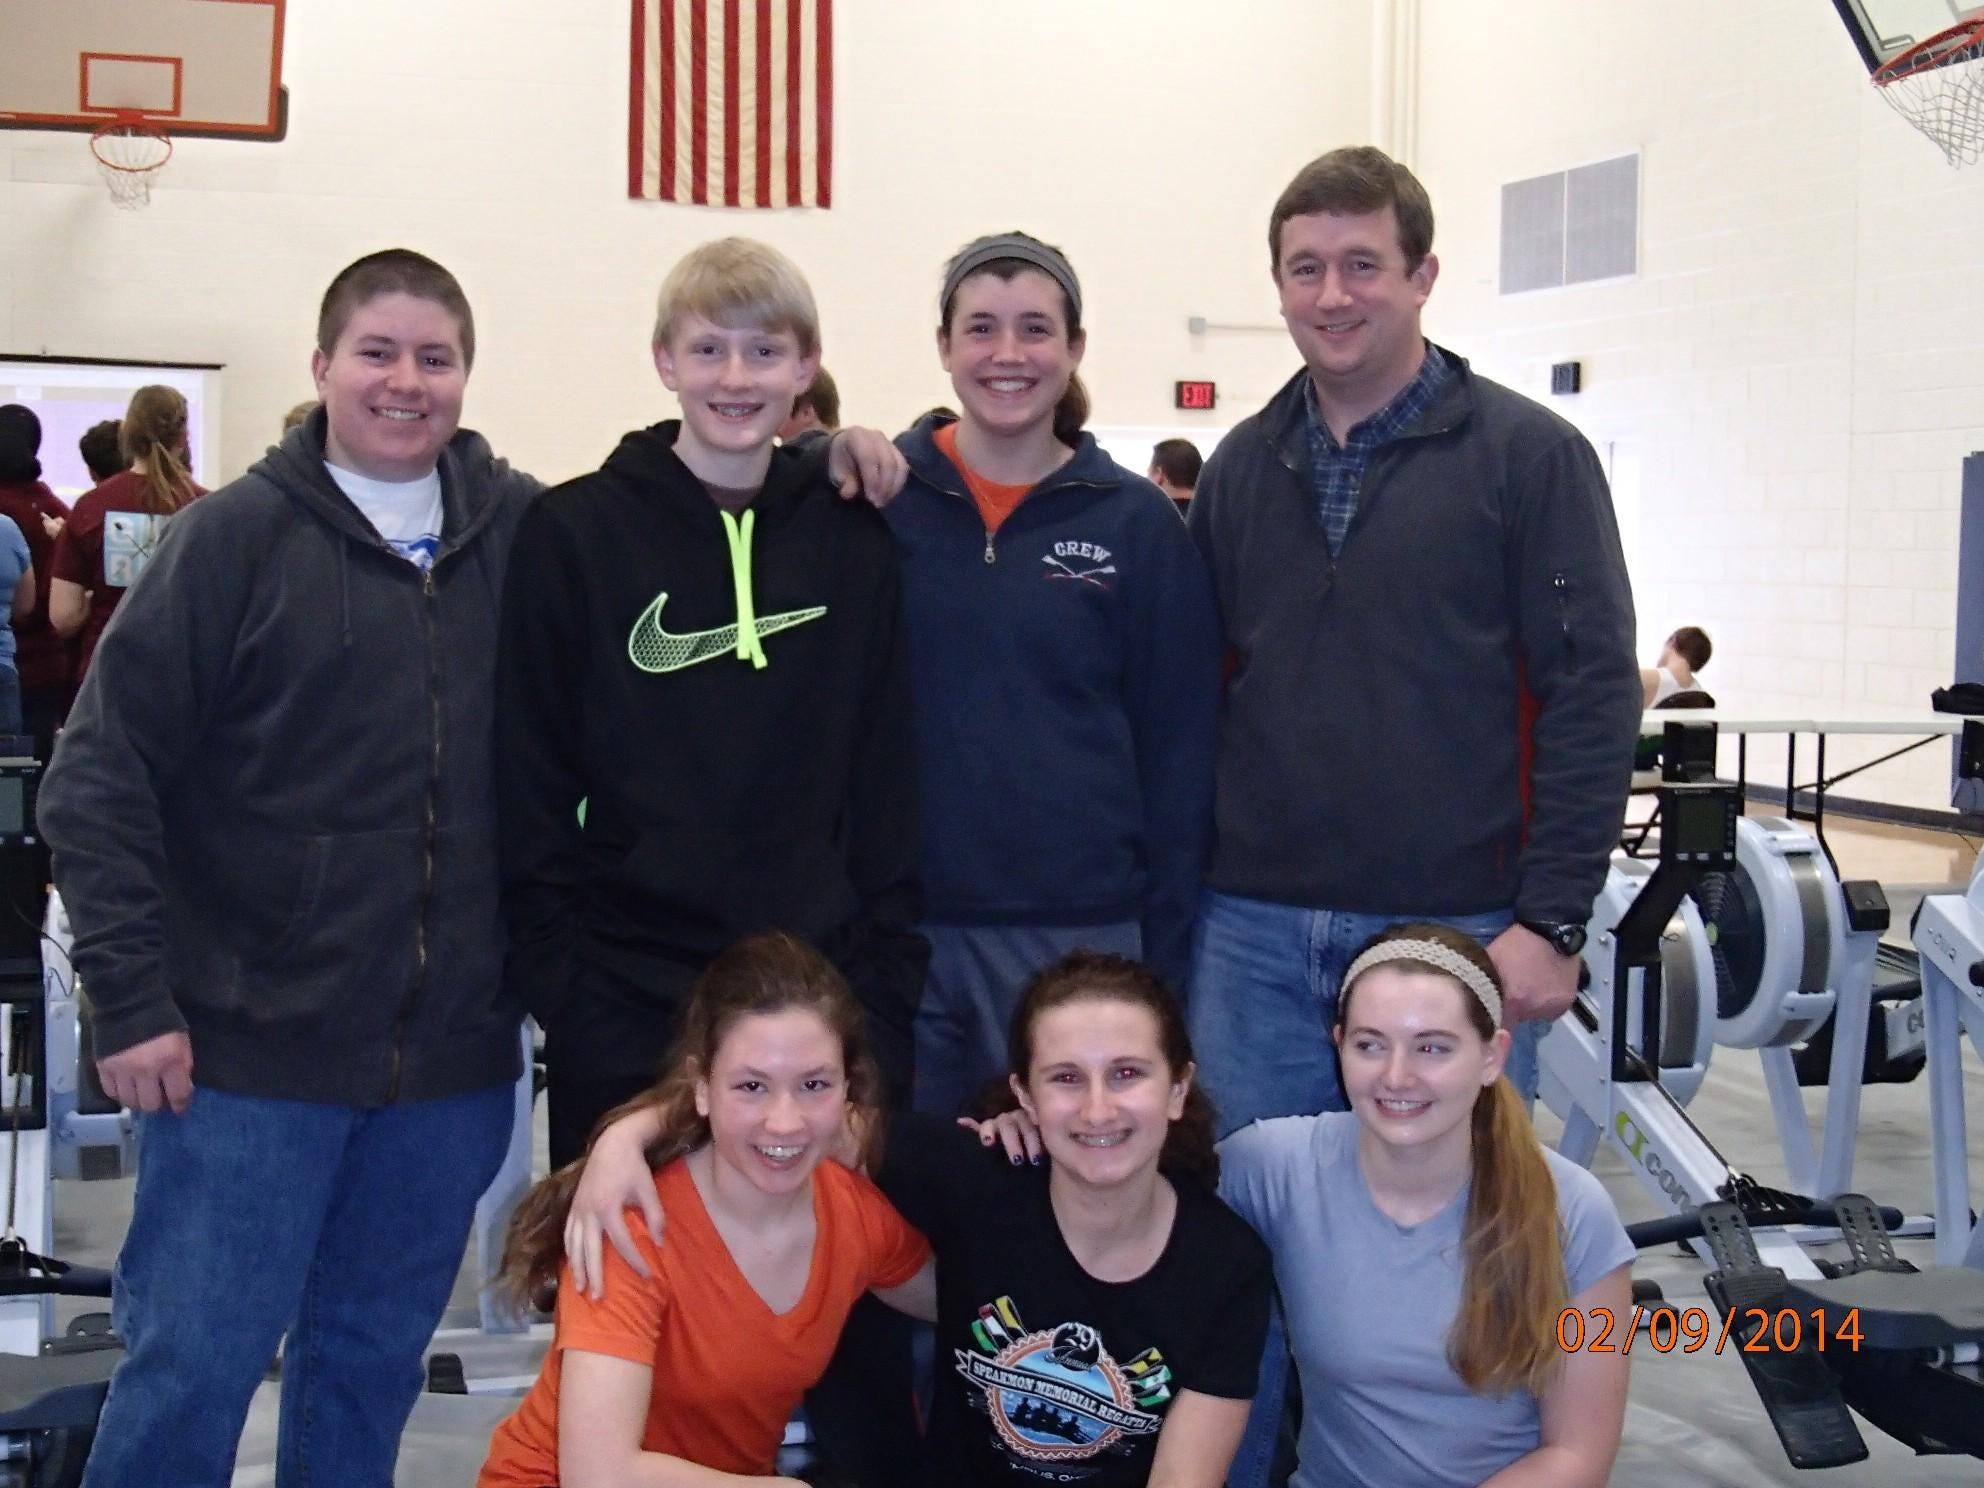 The Clermont Crew rowing team celebrates after competing in the World Indoor Rowing Championship in 2014. In back, from left, are Ben Marquez of Batavia, Ian Moorhead of Bethel, Ashley Collins of Glen Este and coach Paul Schmid. In front are Lindsey Marquez of Amelia, Ana Absalon of Anderson and Camile Gilbert of Walnut Hills.